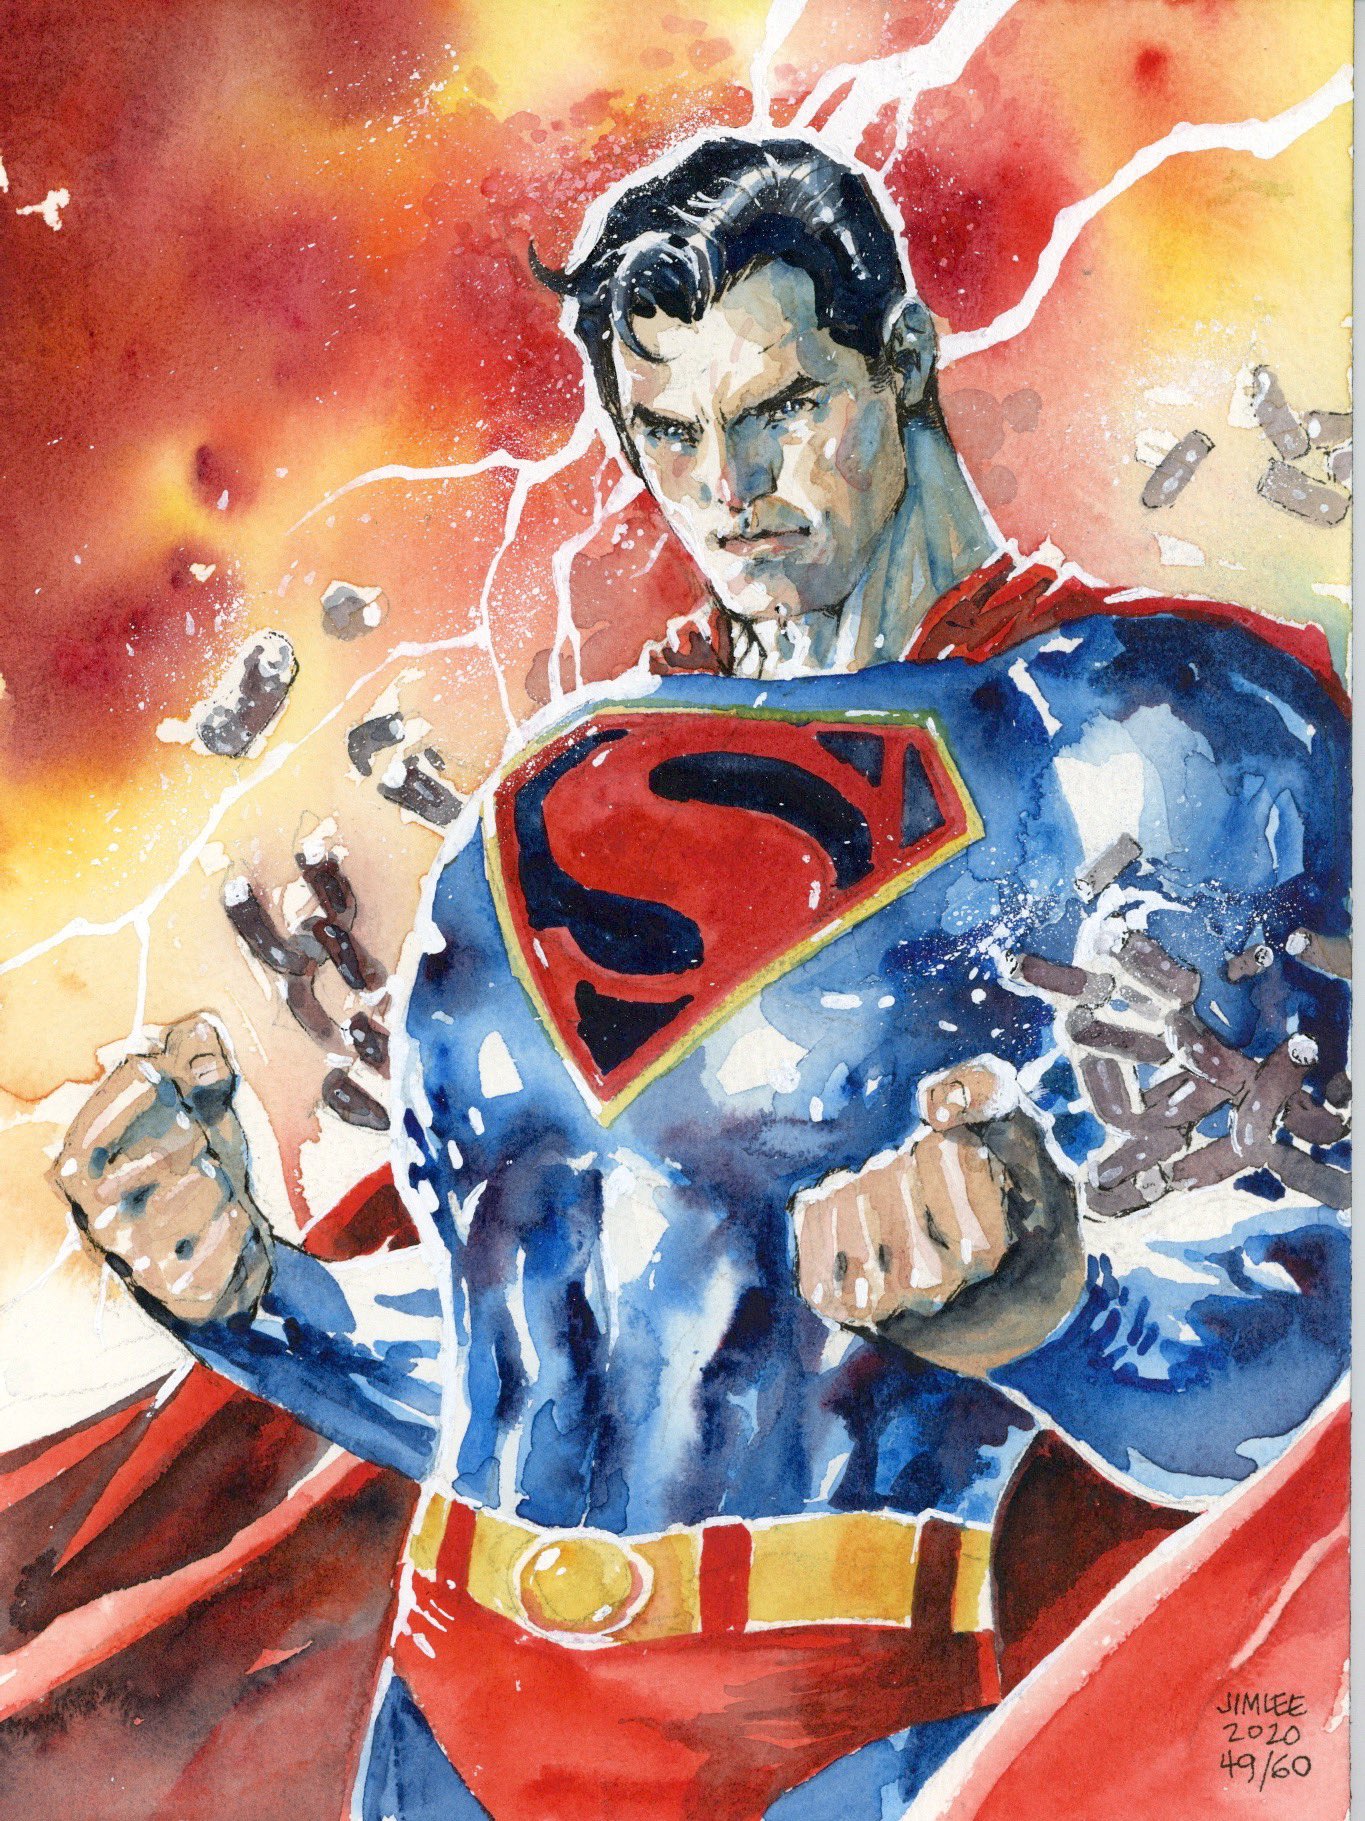 Golden Age Superman Is Unchained in New Jim Lee Watercolor